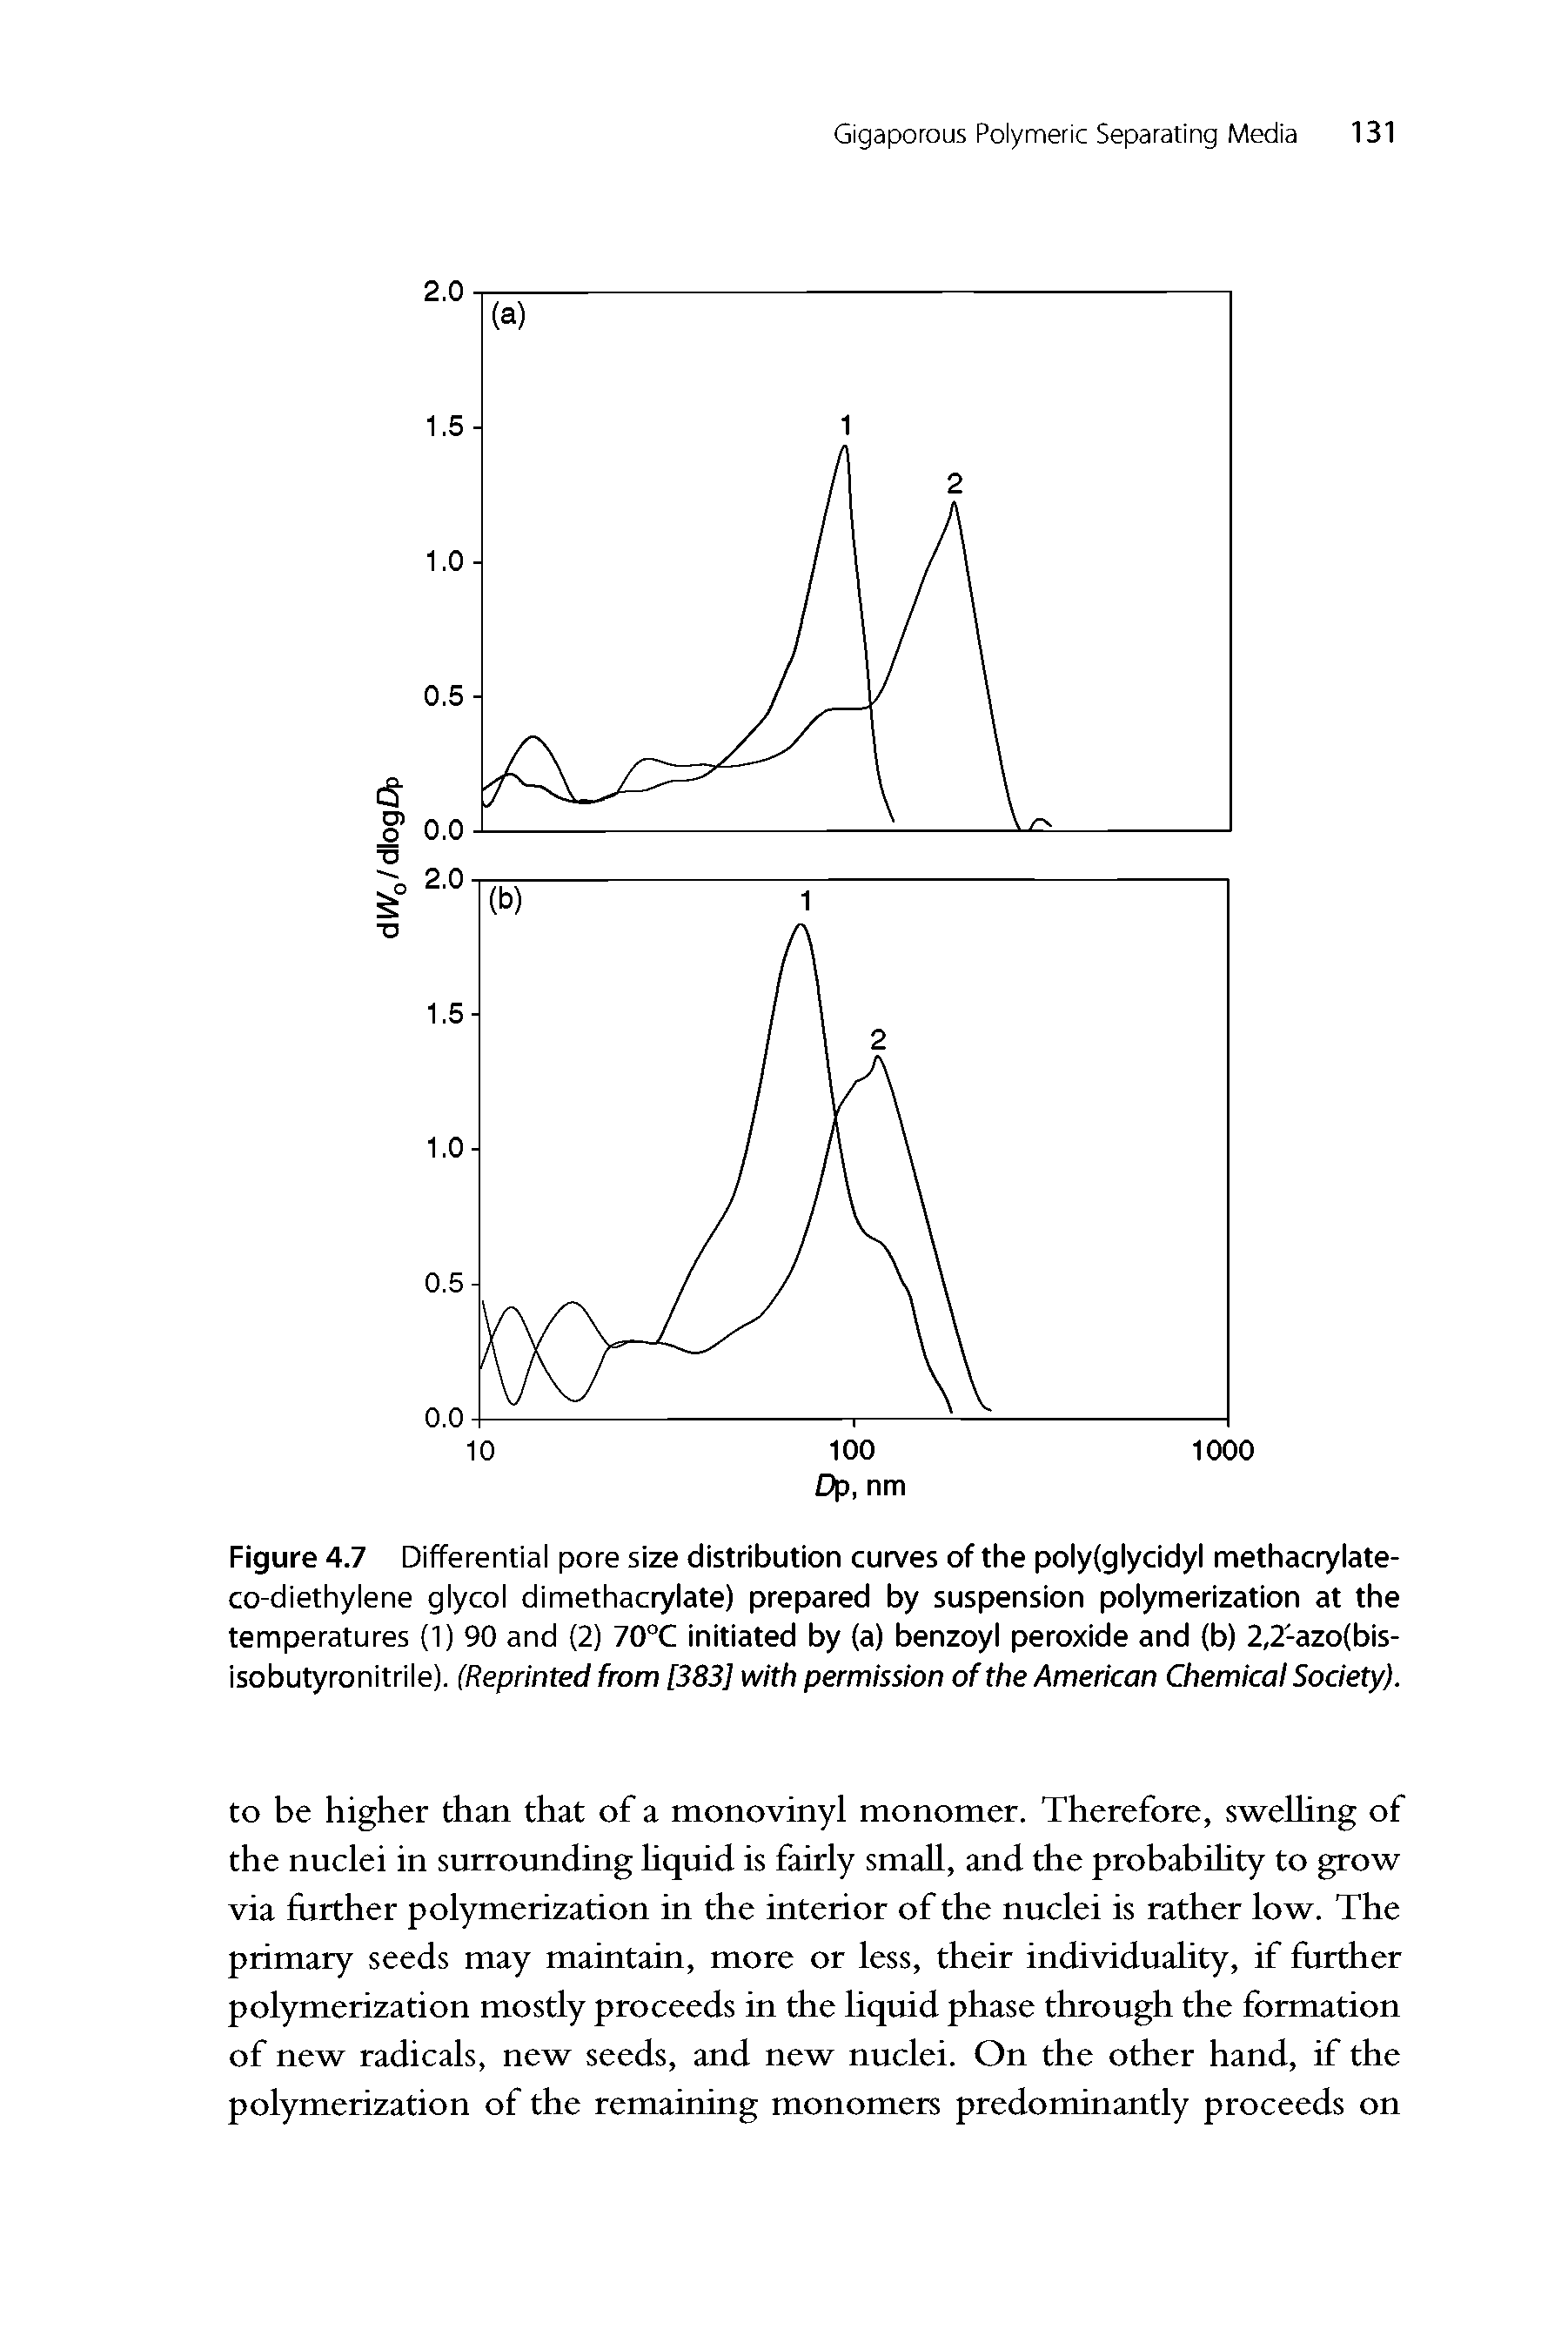 Figure 4.7 Differential pore size distribution curves of the polyfglycidyl methacrylate-co-diethylene glycol dimethacrylate) prepared by suspension polymerization at the temperatures (1) 90 and (2) 70 C initiated by (a) benzoyl peroxide and (b) 2,2-azo(bis-isobutyronitrile). (Reprinted from [383] with permission of the American Chemical Society).